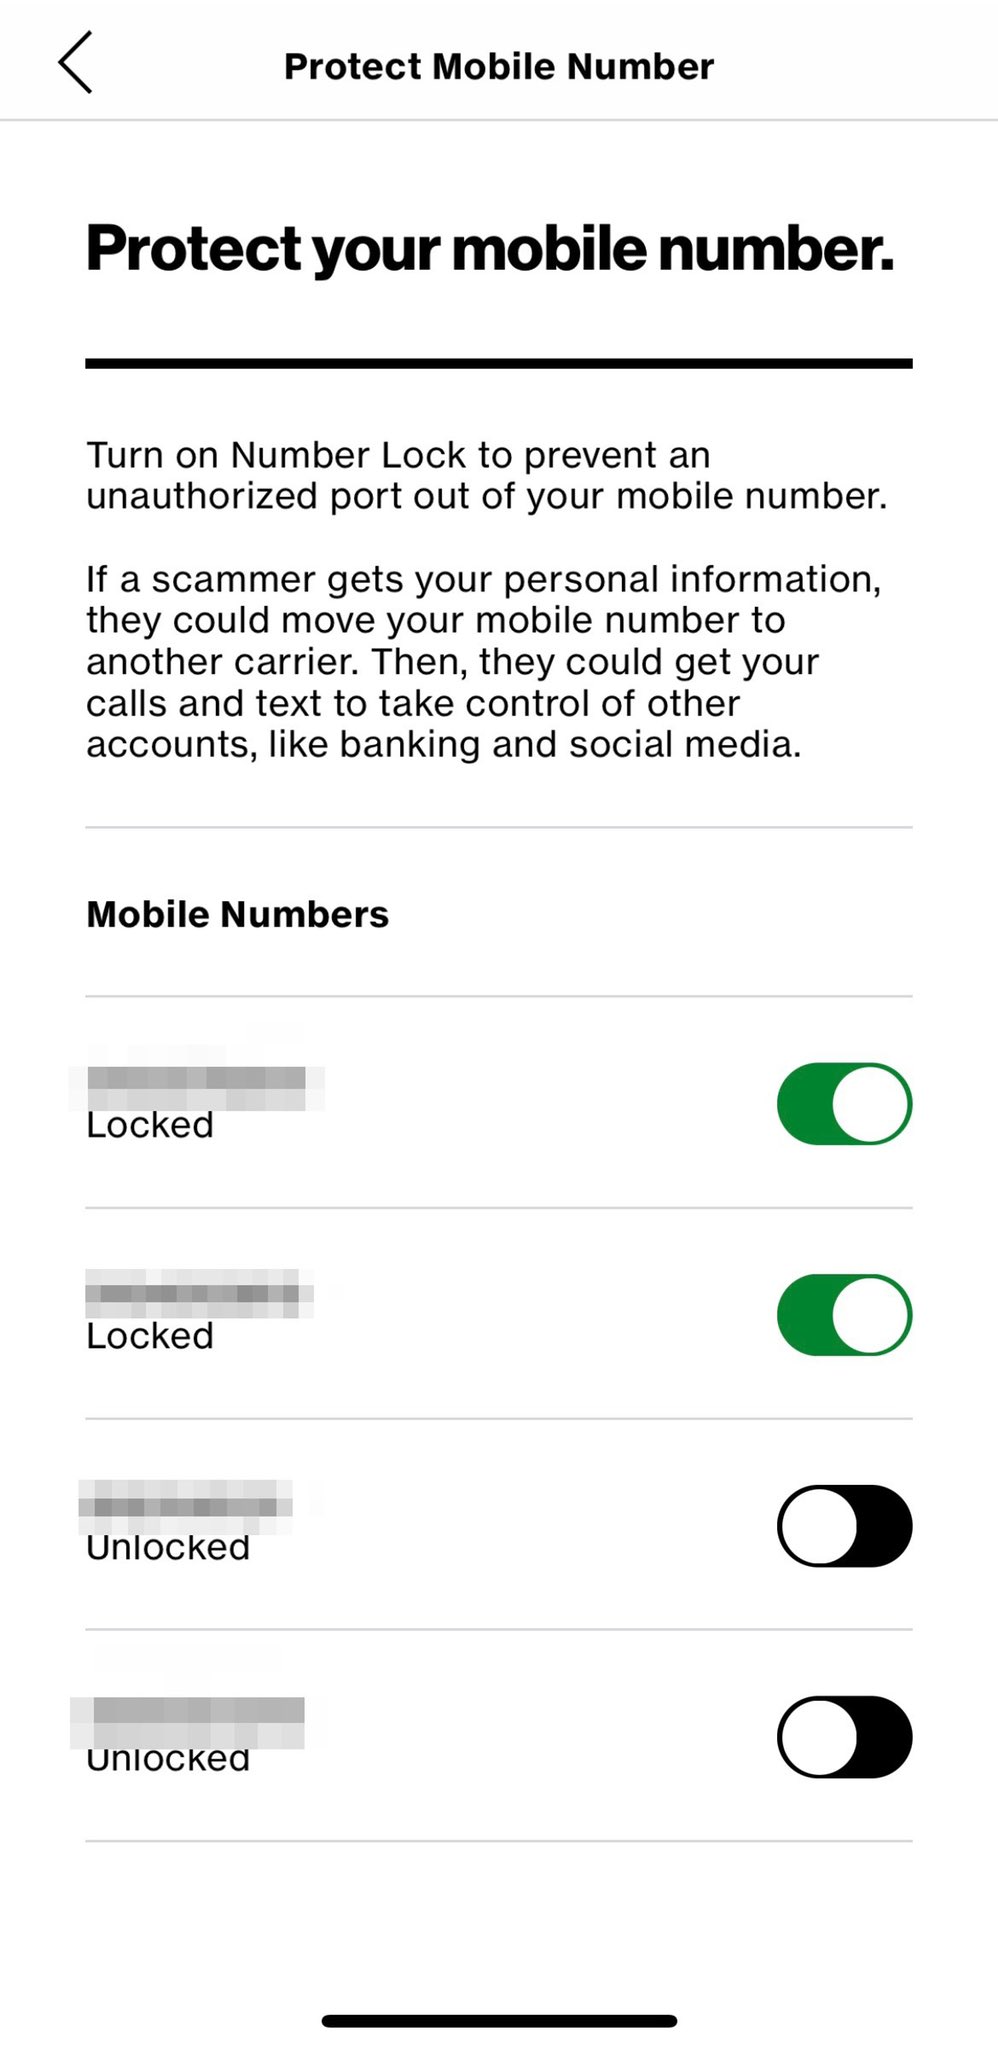 Rich DeMuro on Twitter: "Just found something called Number Lock in the  Verizon app. Sort of like a credit freeze but for your phone number so  scammers can't port it to another